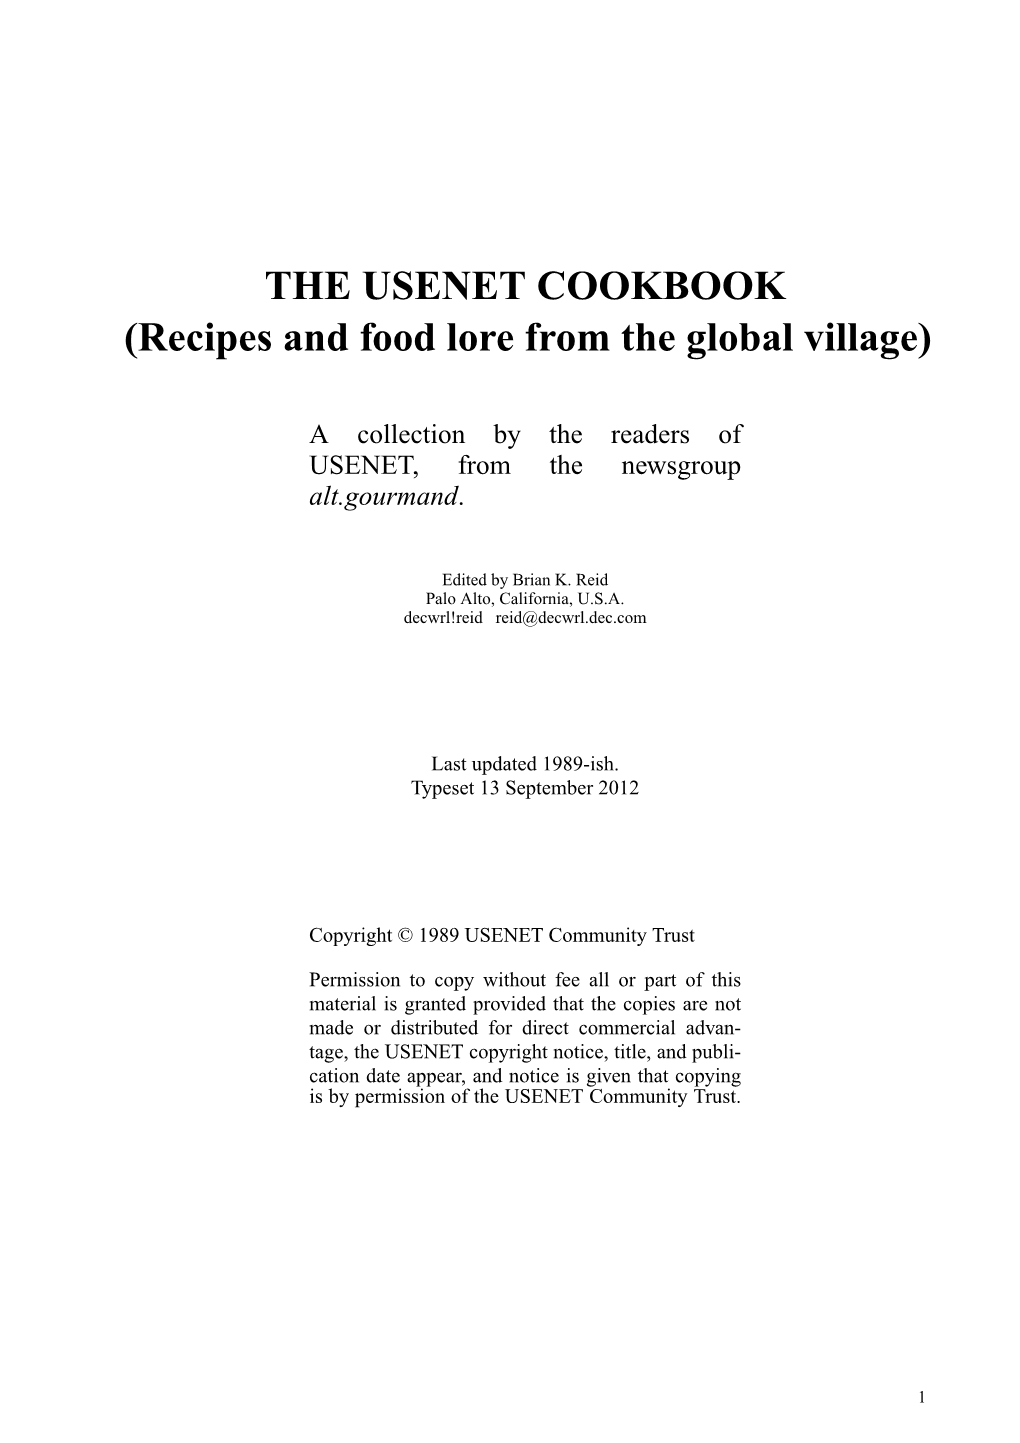 THE USENET COOKBOOK (Recipes and Food Lore from the Global Village)